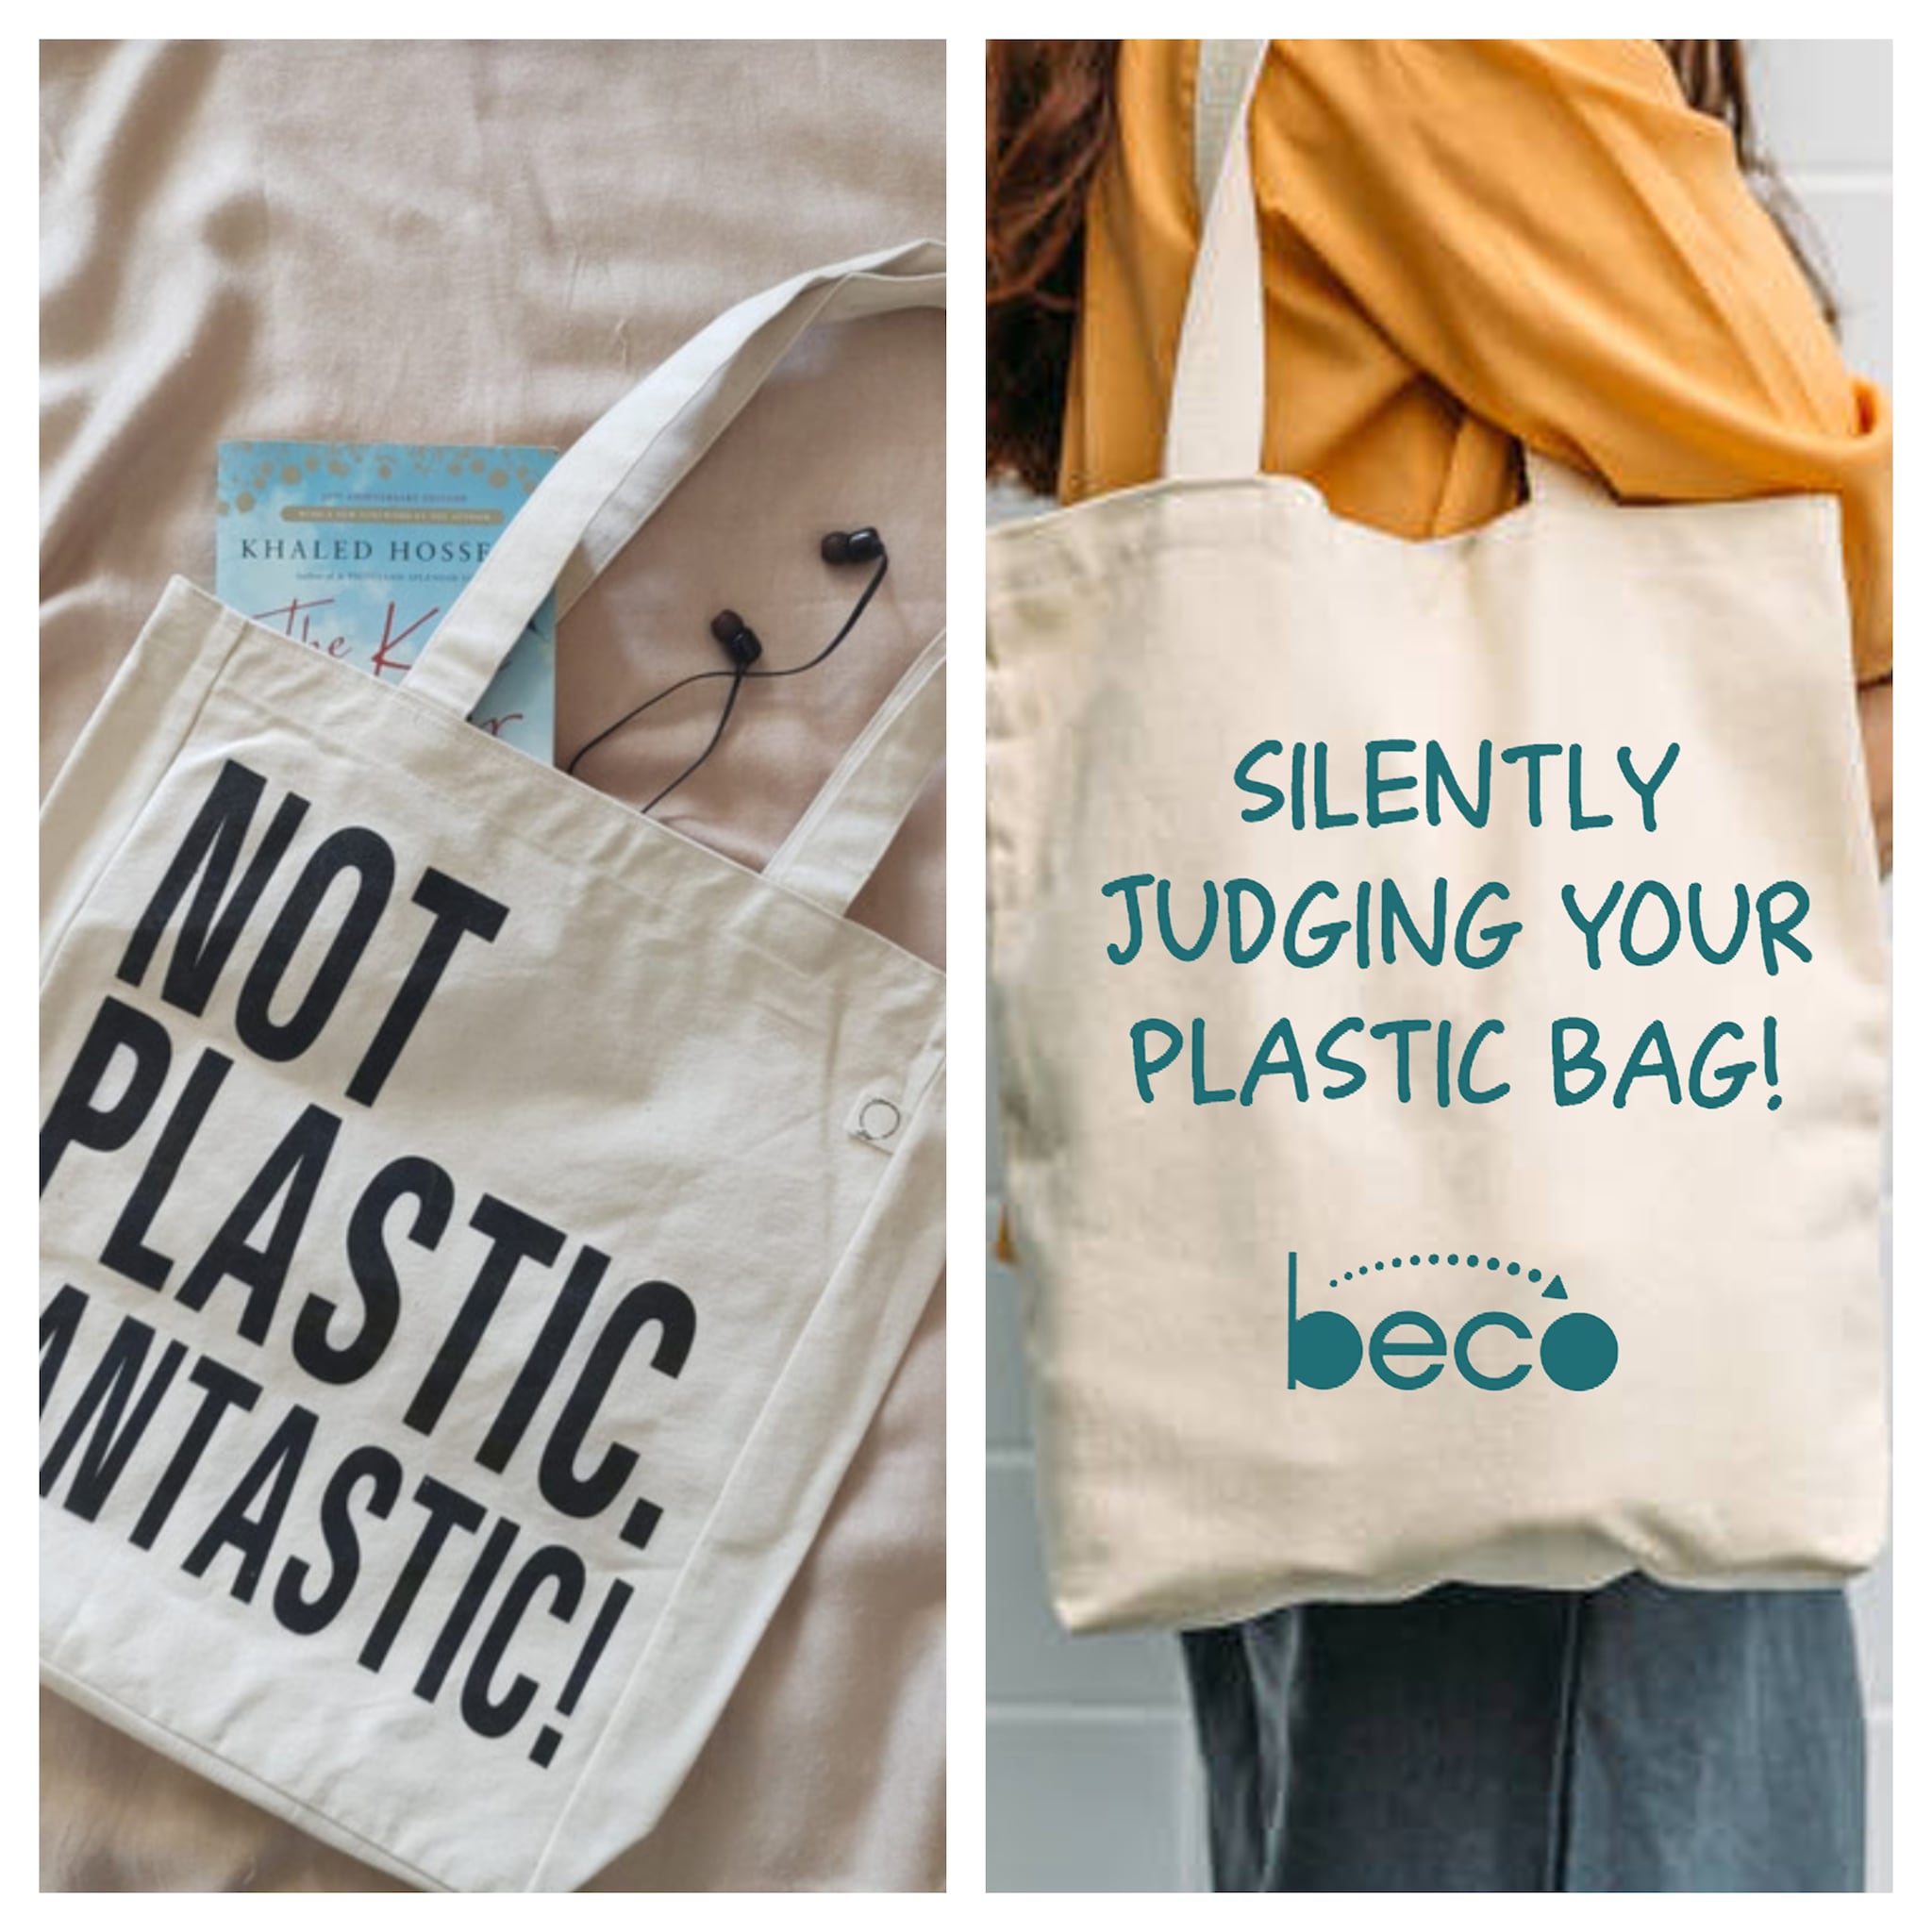 Say what you think to plastic bag users with Meolaa's canvas tote bag (left) and Beco's reusable cloth bag.